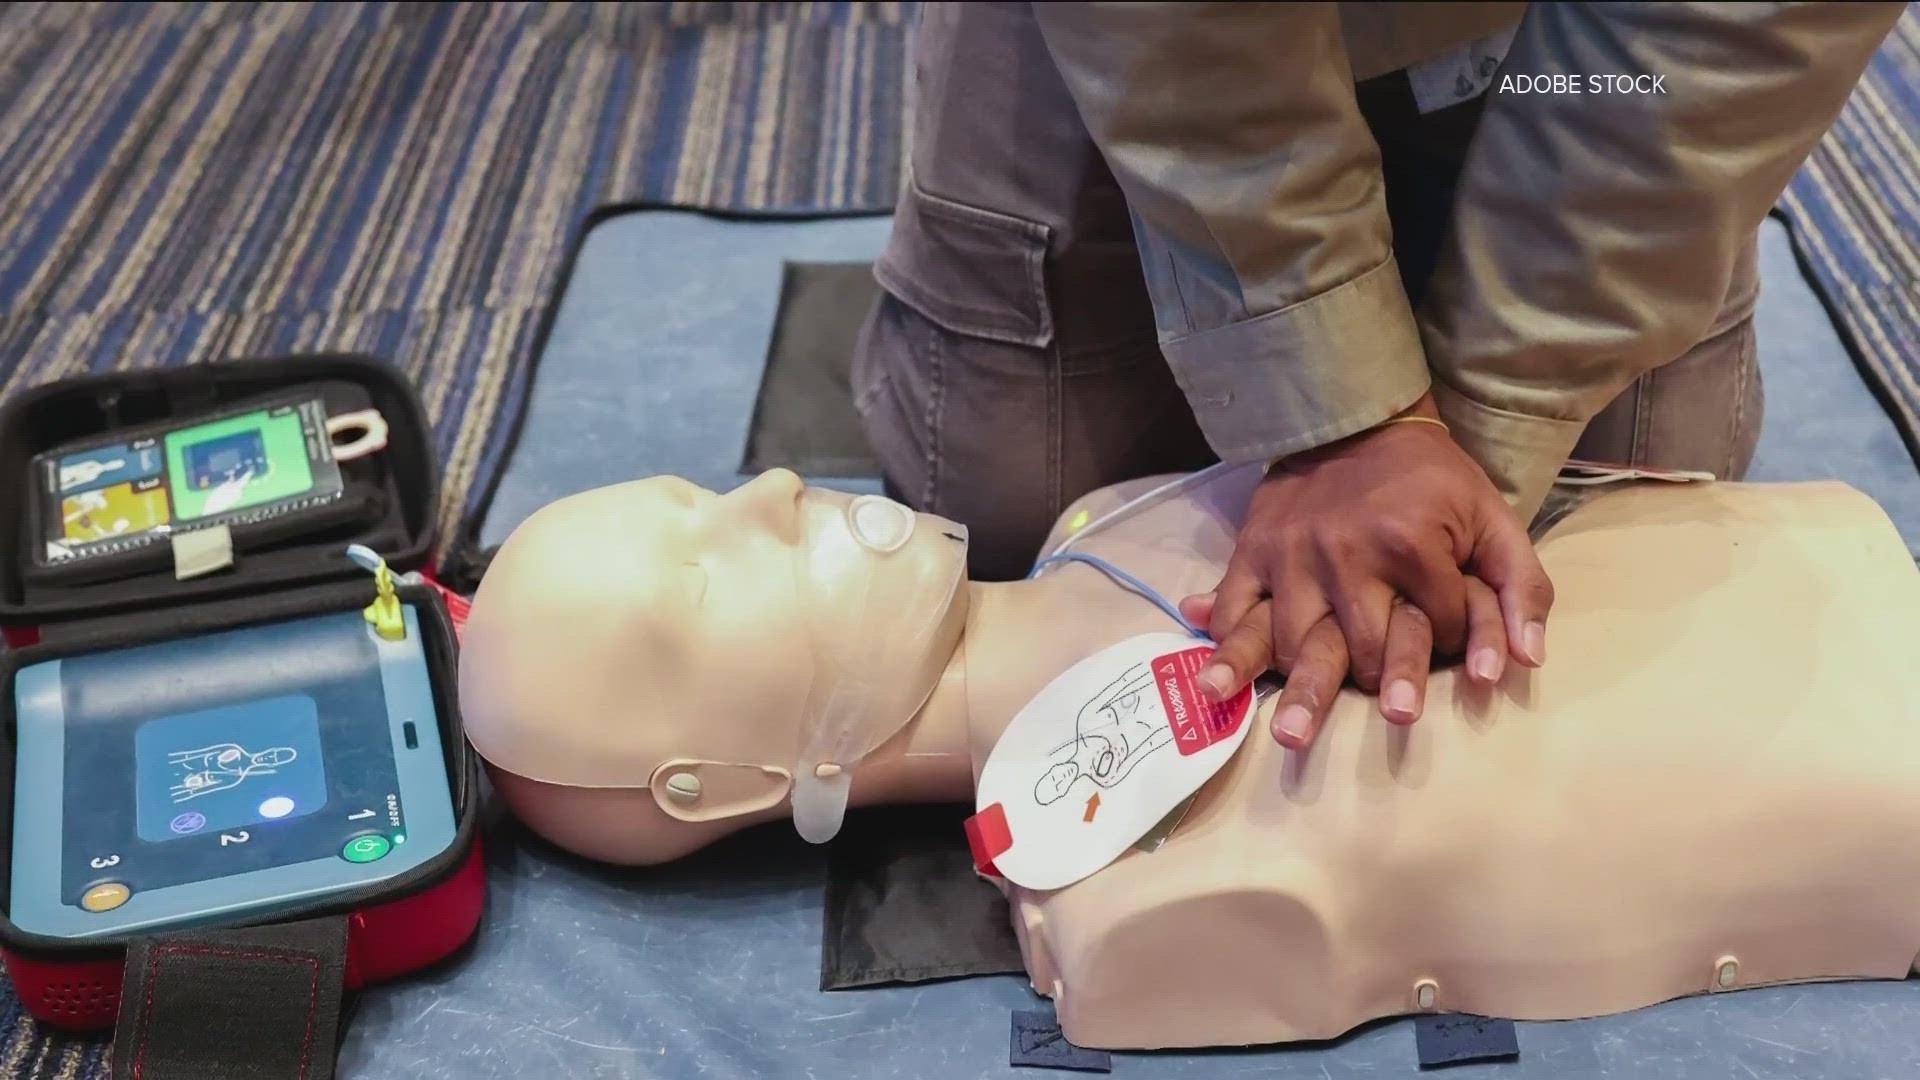 State lawmakers are set to take a look at a new bill that would require all schools in Georgia to have an AED.